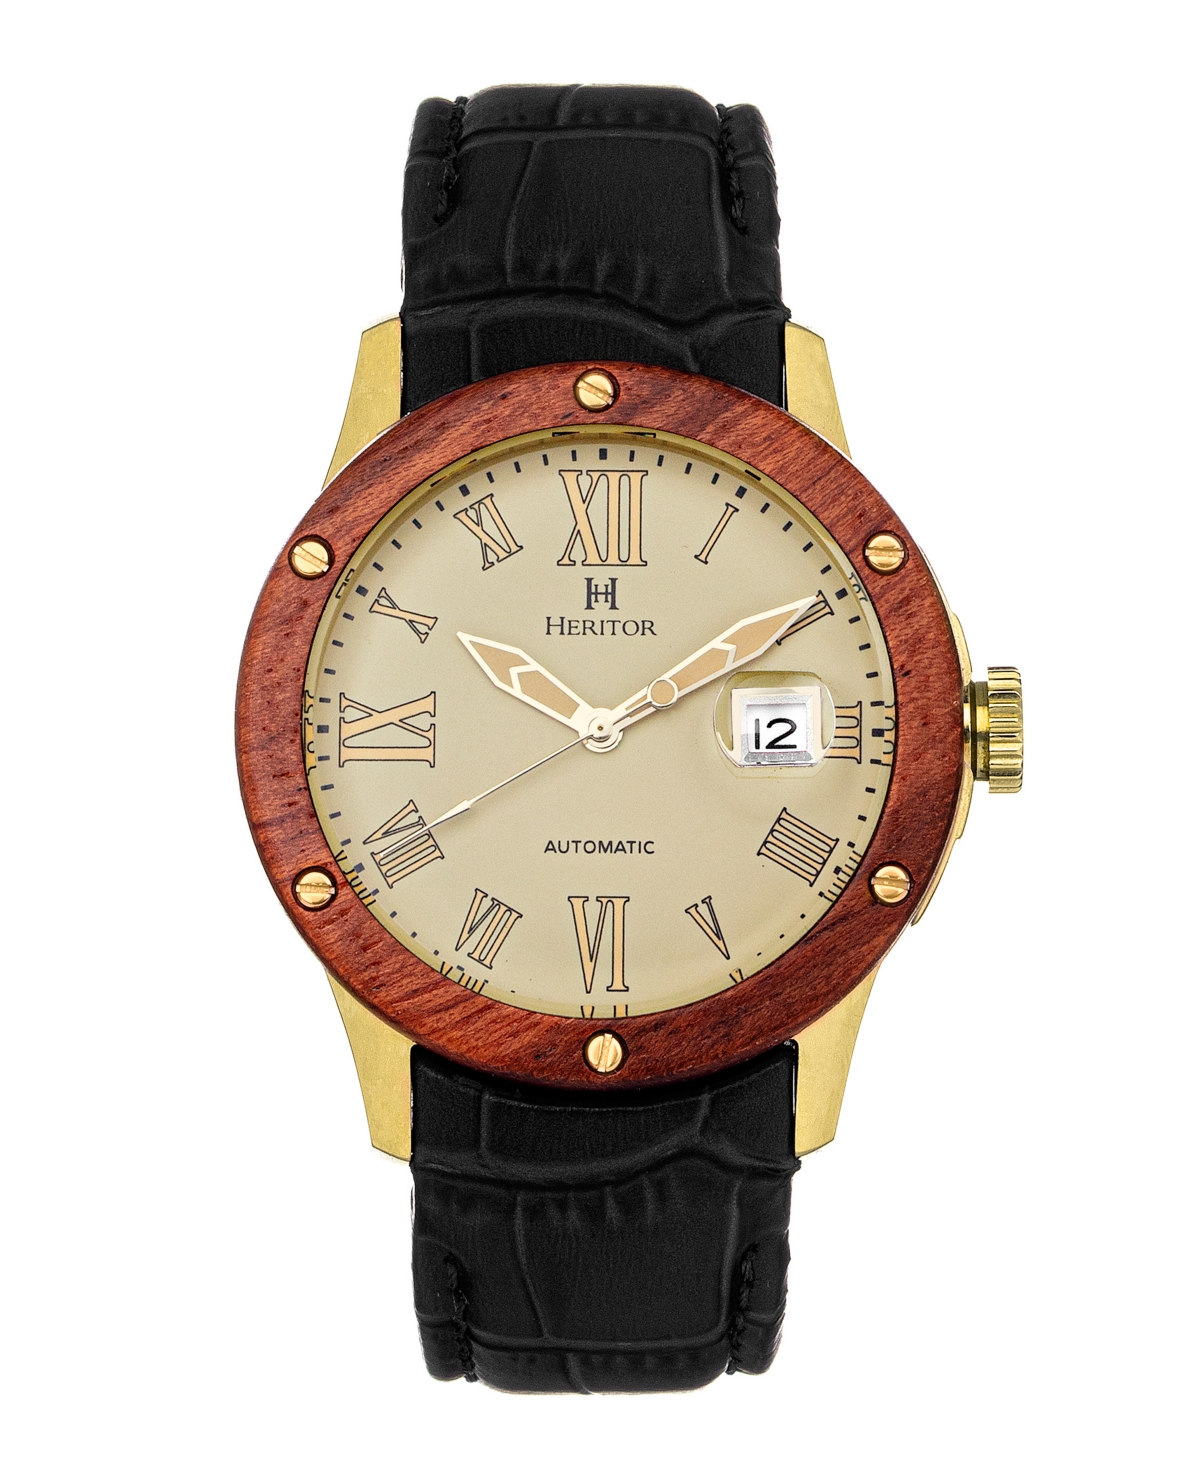 Automatic Everest Wooden Bezel Black or Blue Genuine Leather Band Watch, 47mm - Gold-Tone, Cream